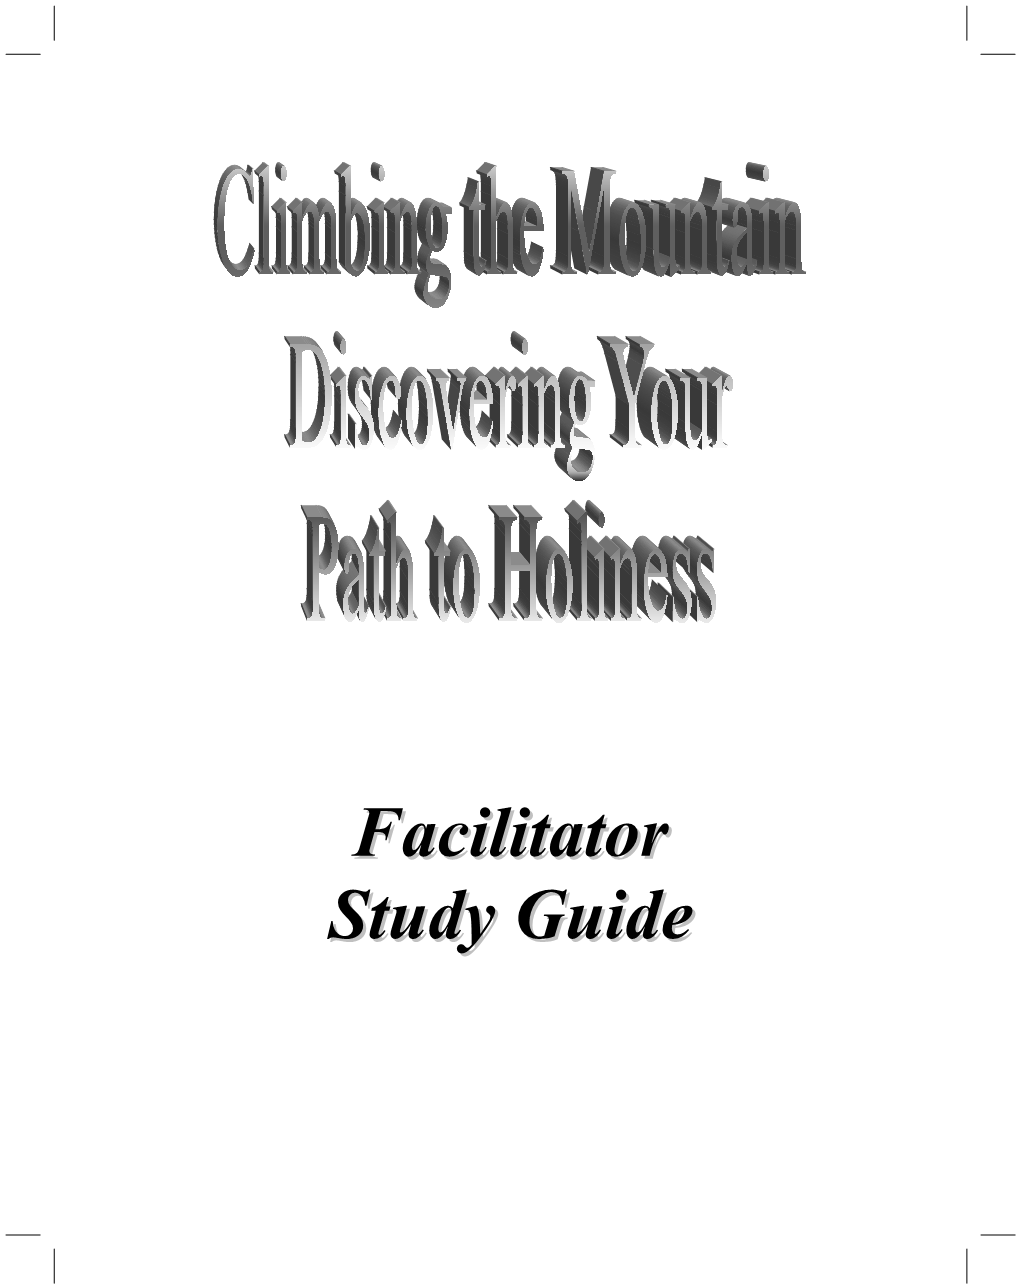 Climbing the Mountain- Discovering Your Path to Holiness Facilitator Study Guide